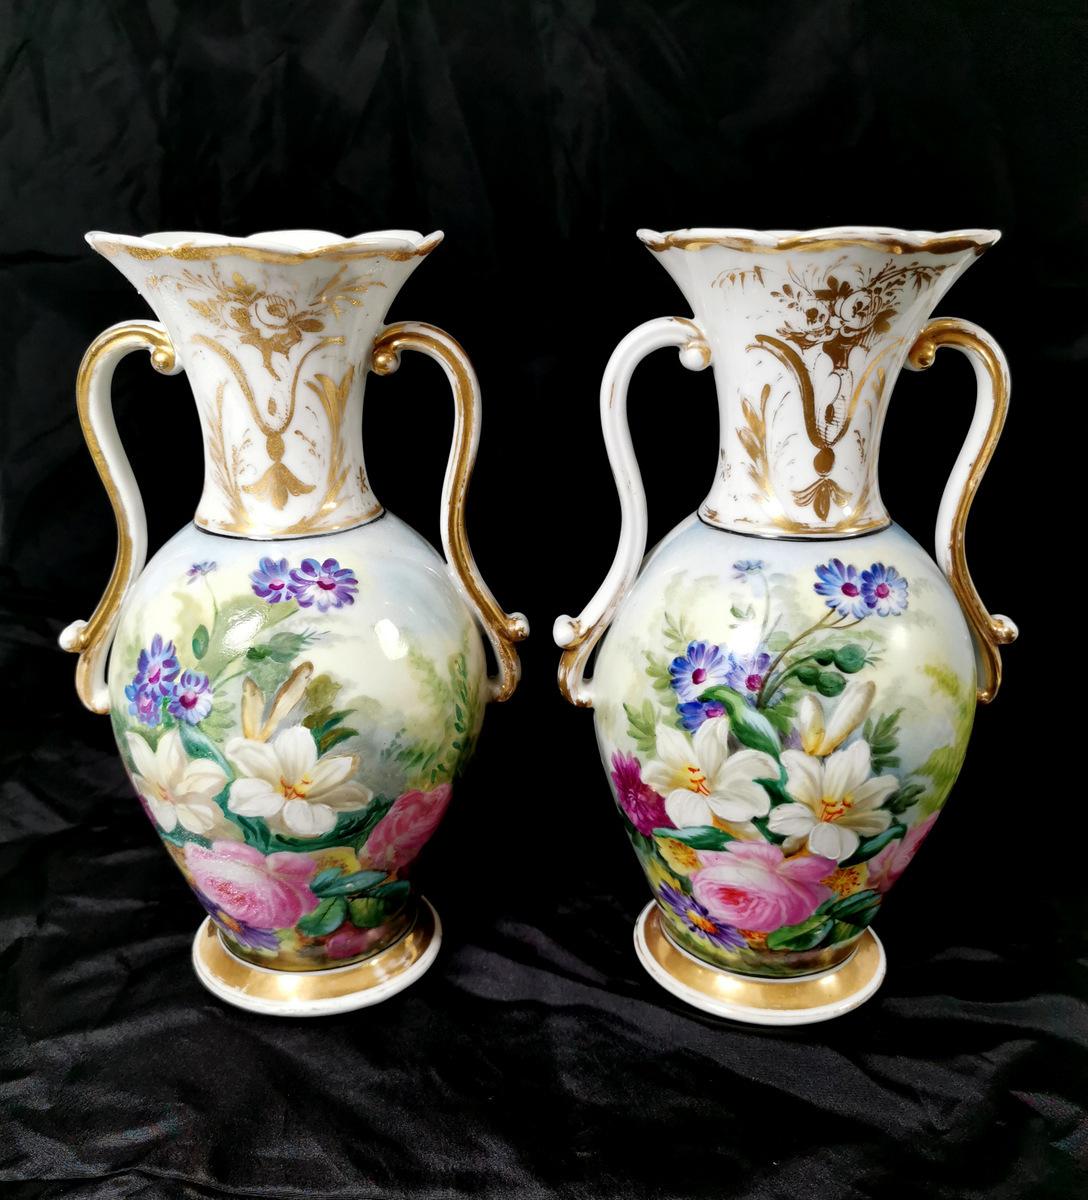 We kindly suggest you read the whole description, because with it we try to give you detailed technical and historical information to guarantee the authenticity of our objects.
Beautiful and particular pair of French vases in white porcelain with